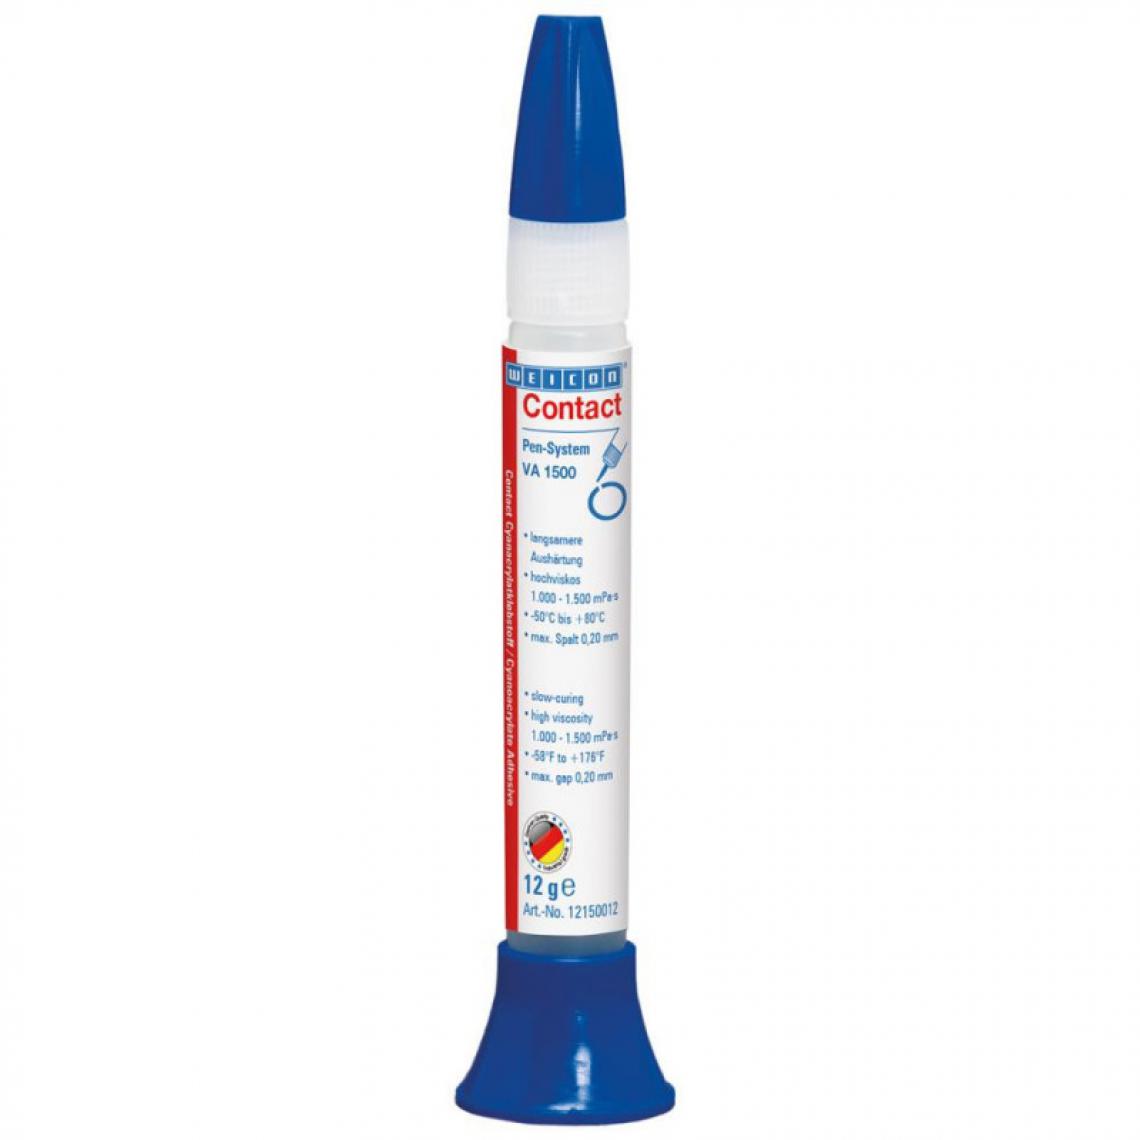 marque generique - Colle cyanoacrylate VA 1500 30 g Pen-System Weicon (Par 20) - Mastic, silicone, joint